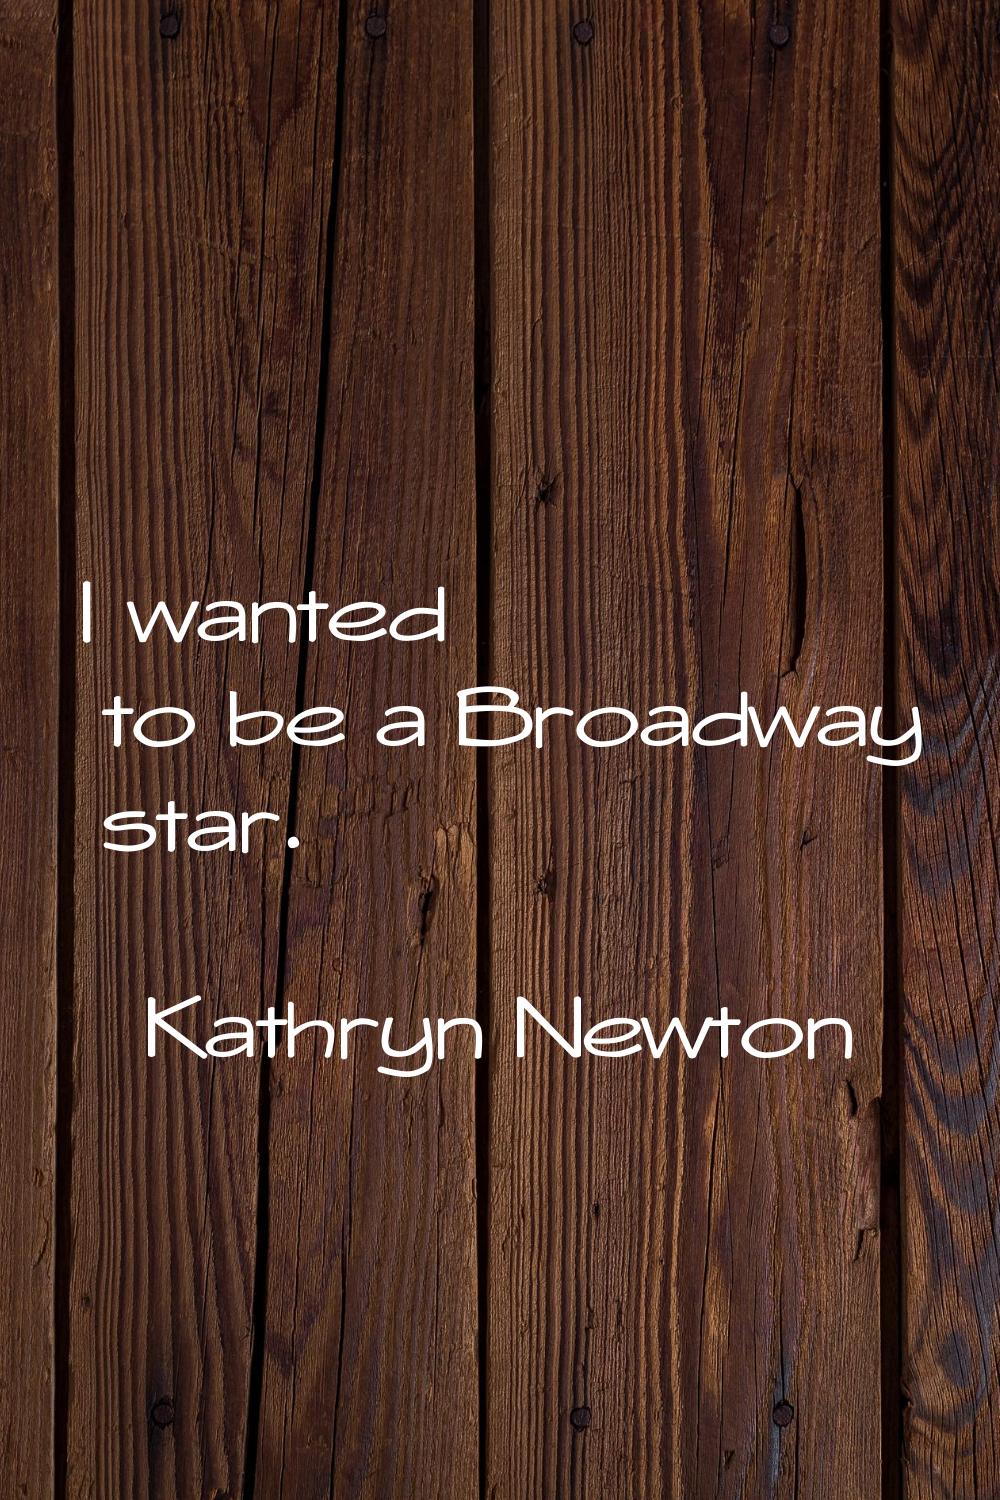 I wanted to be a Broadway star.